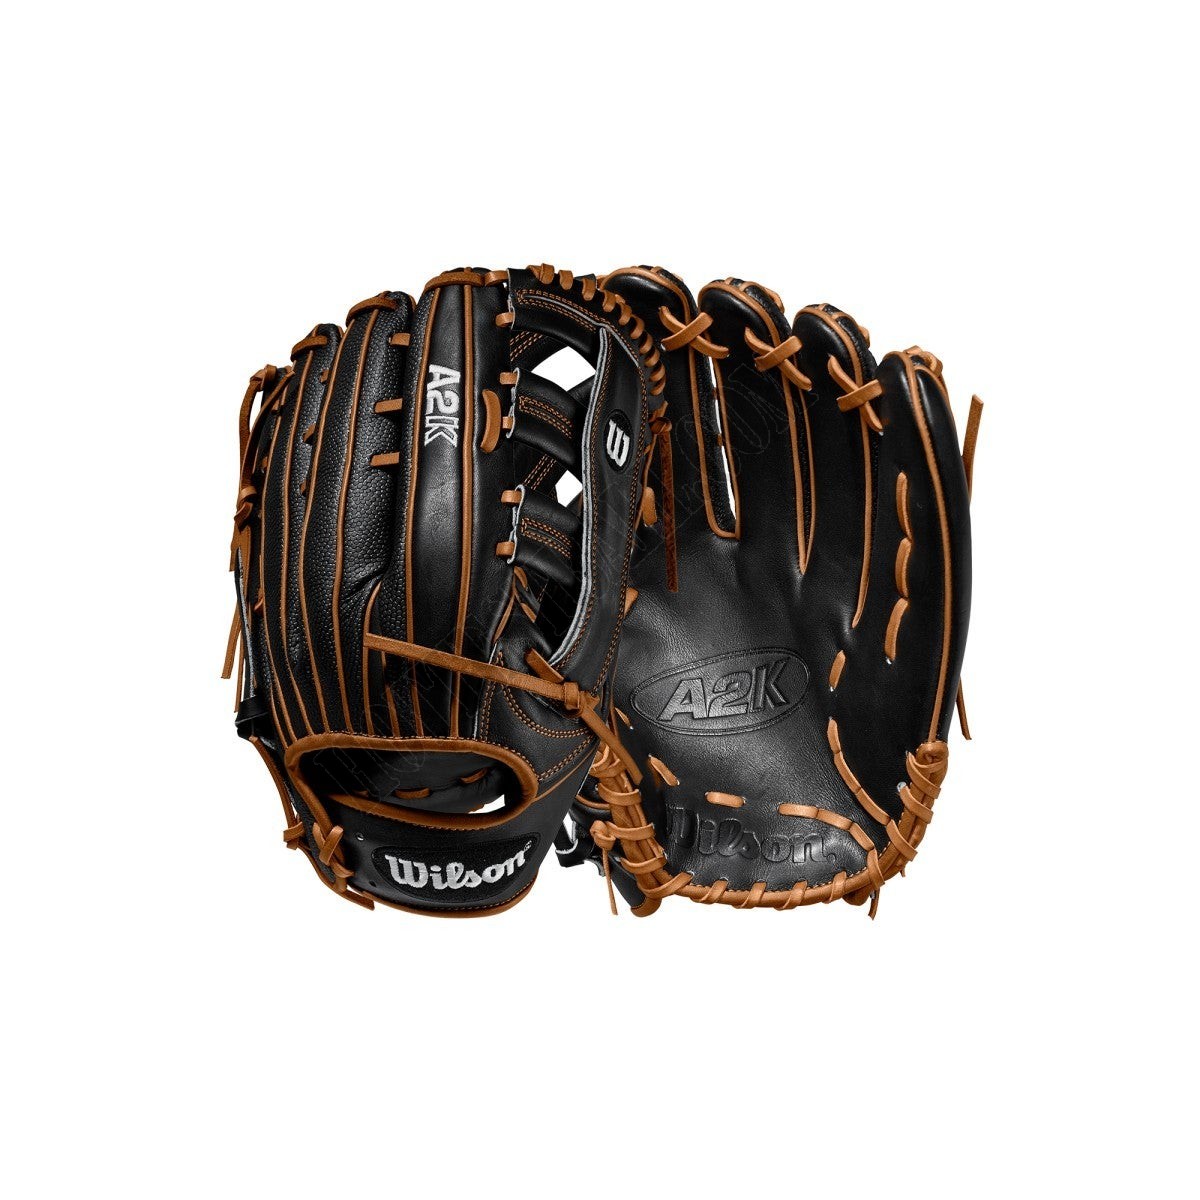 2020 A2K 1775 12.75" Outfield Baseball Glove ● Wilson Promotions - 2020 A2K 1775 12.75" Outfield Baseball Glove ● Wilson Promotions